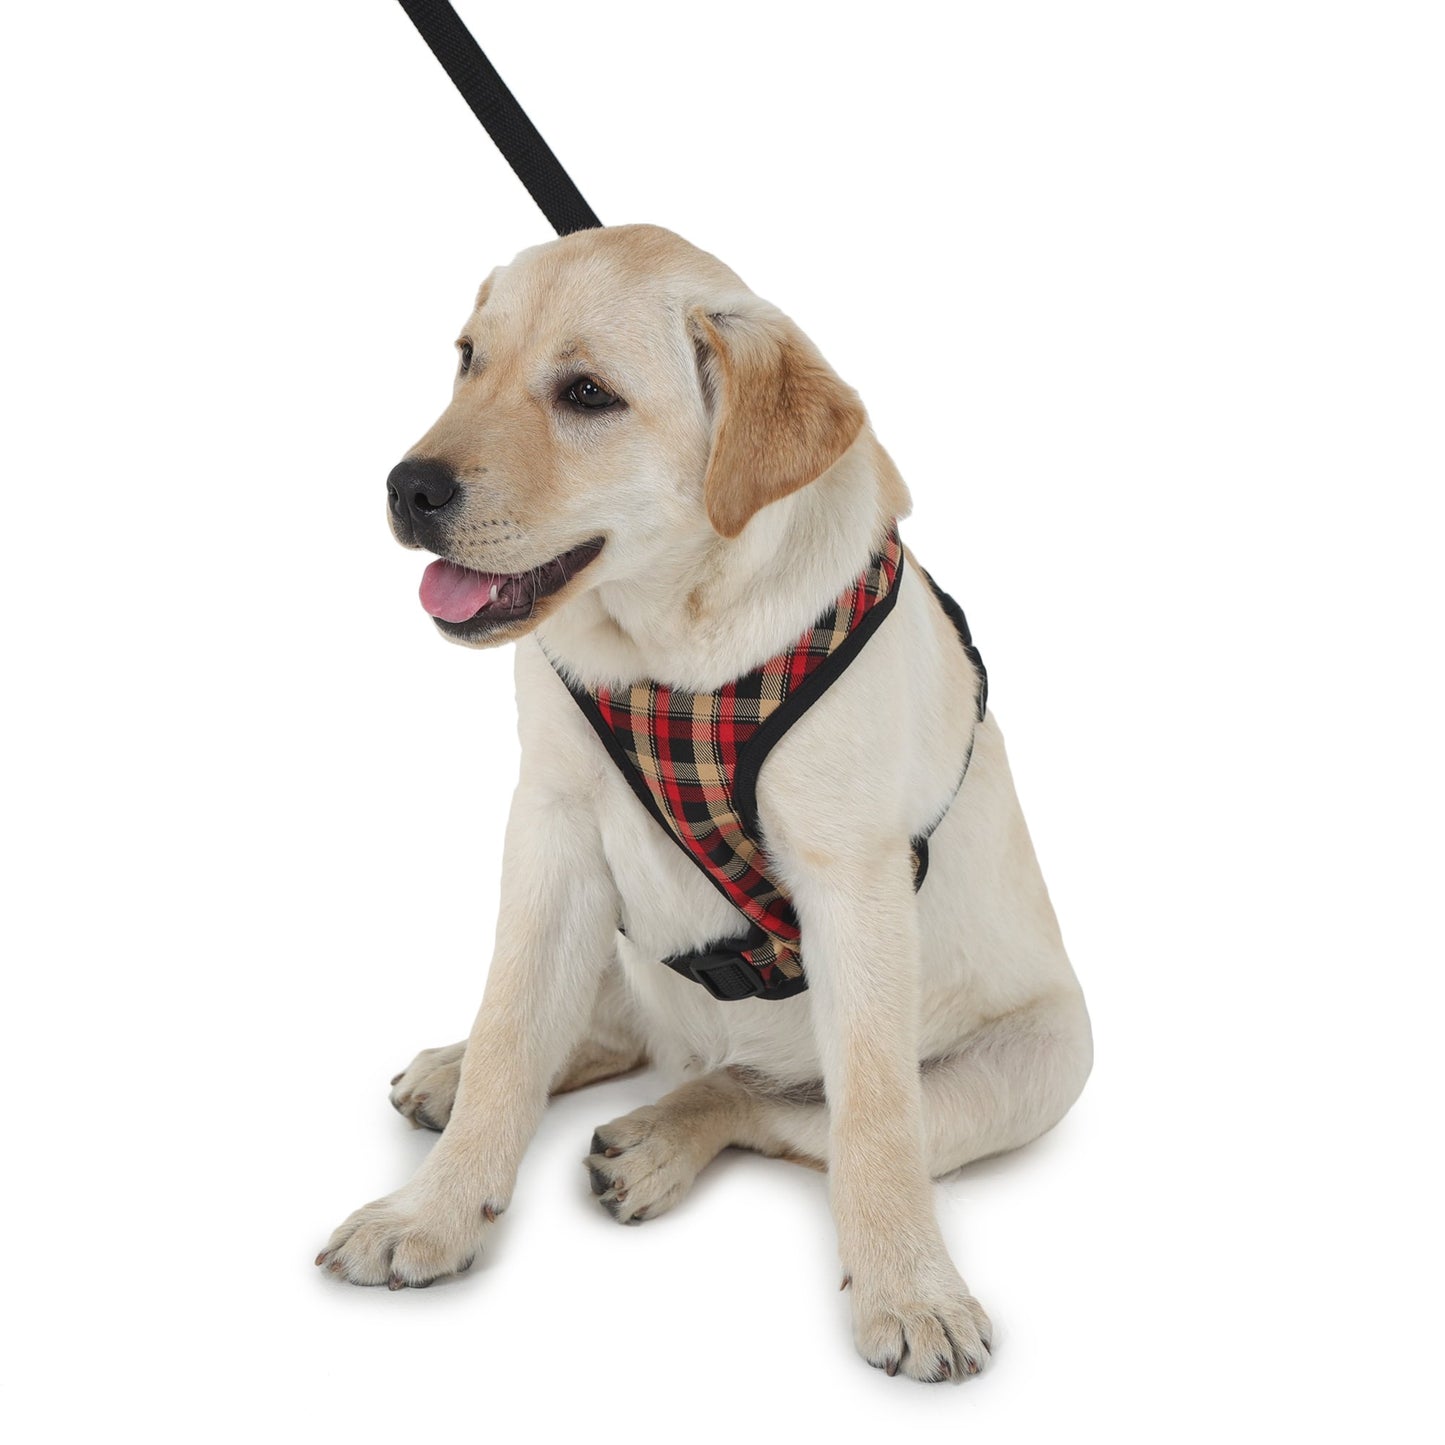 shop online for dog harness by Barks & Wags